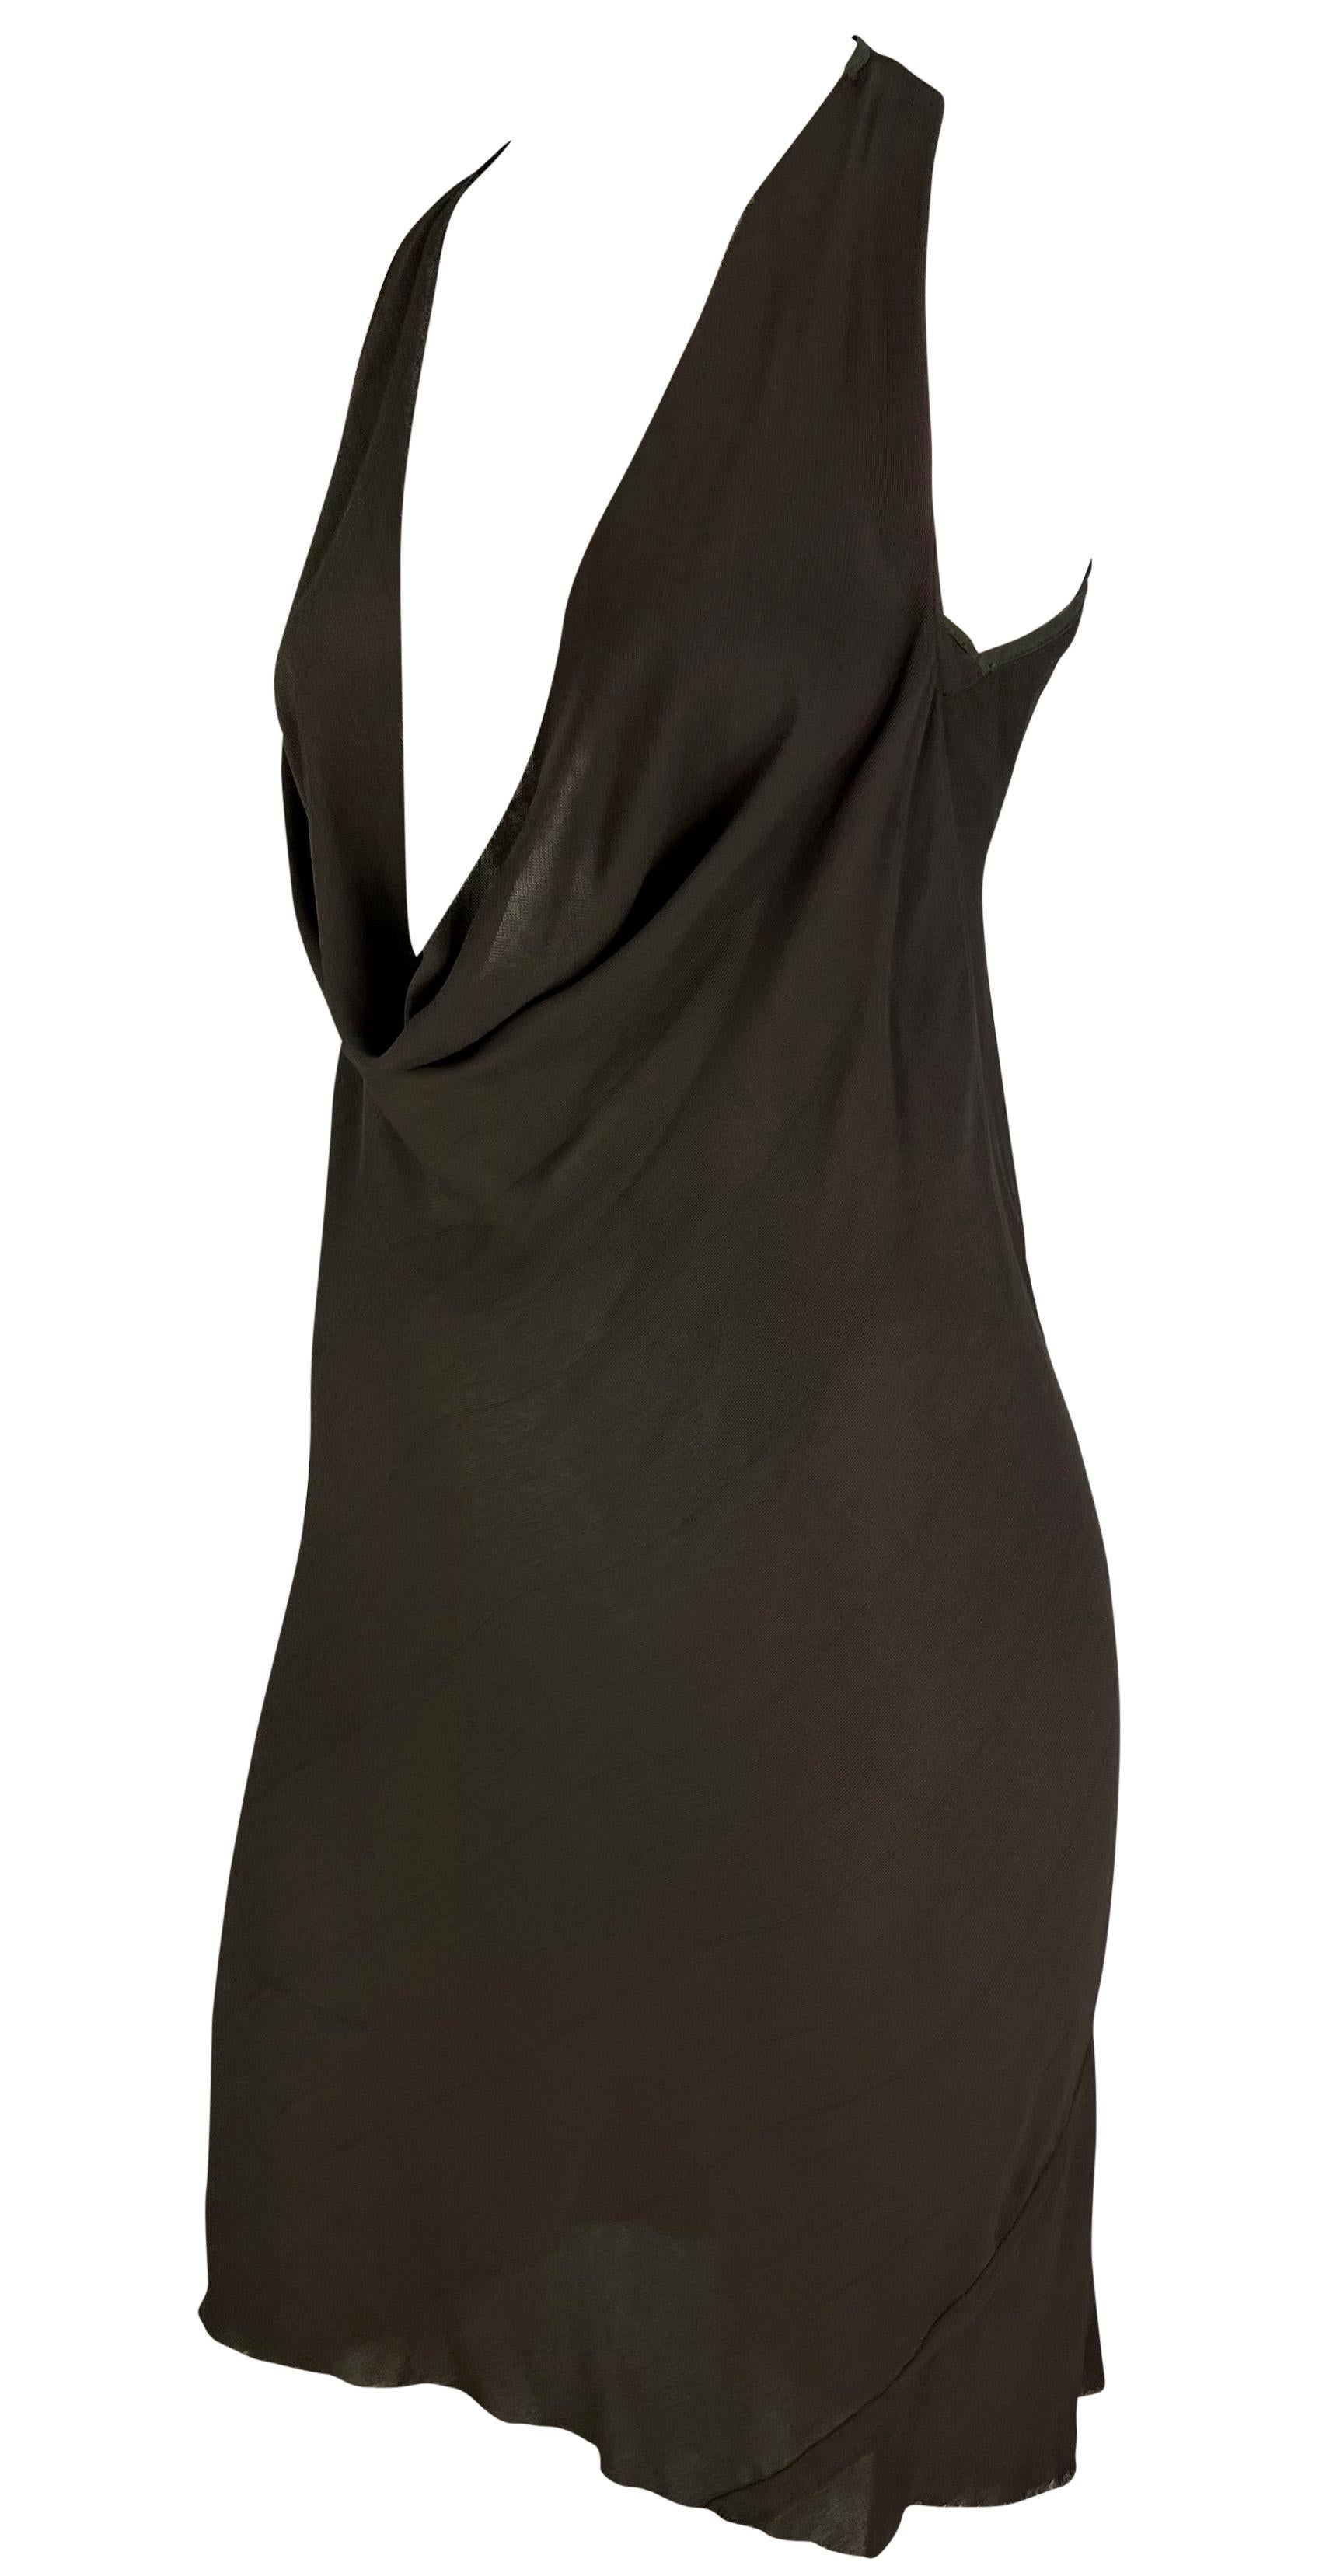 S/S 2005 Rick Owens 'Scorpio' Sheer Raw Edge Plunging Cowl Brown Mini Dress In Excellent Condition For Sale In West Hollywood, CA